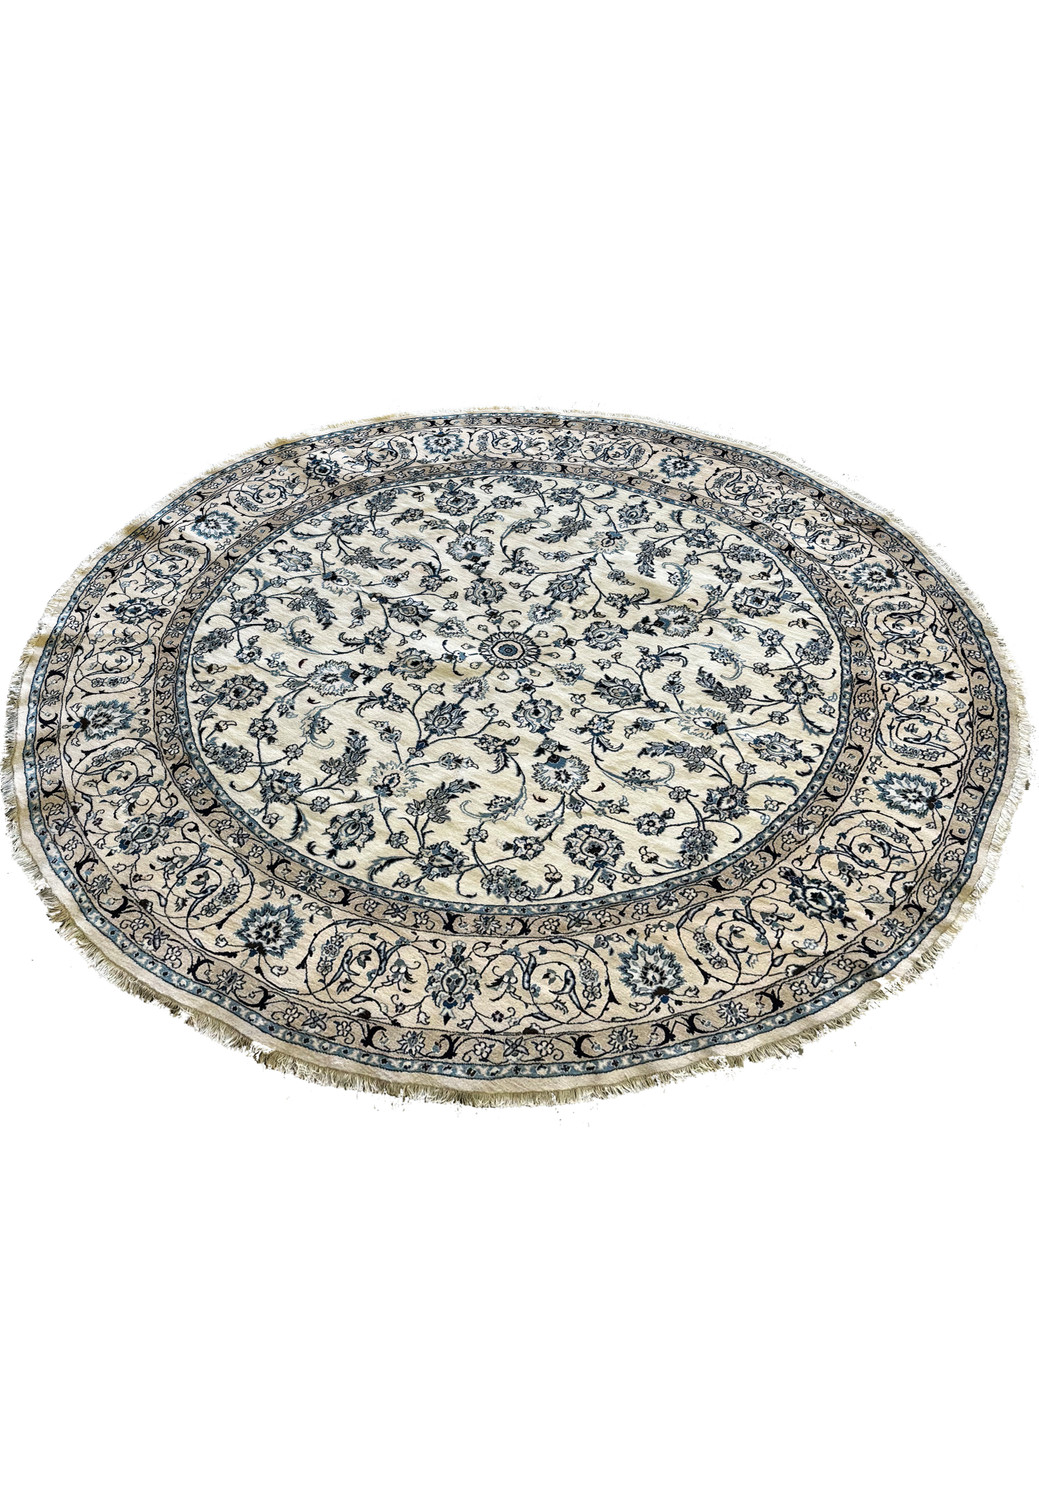 Luxurious hand-knotted Persian Nain round rug with silk accents